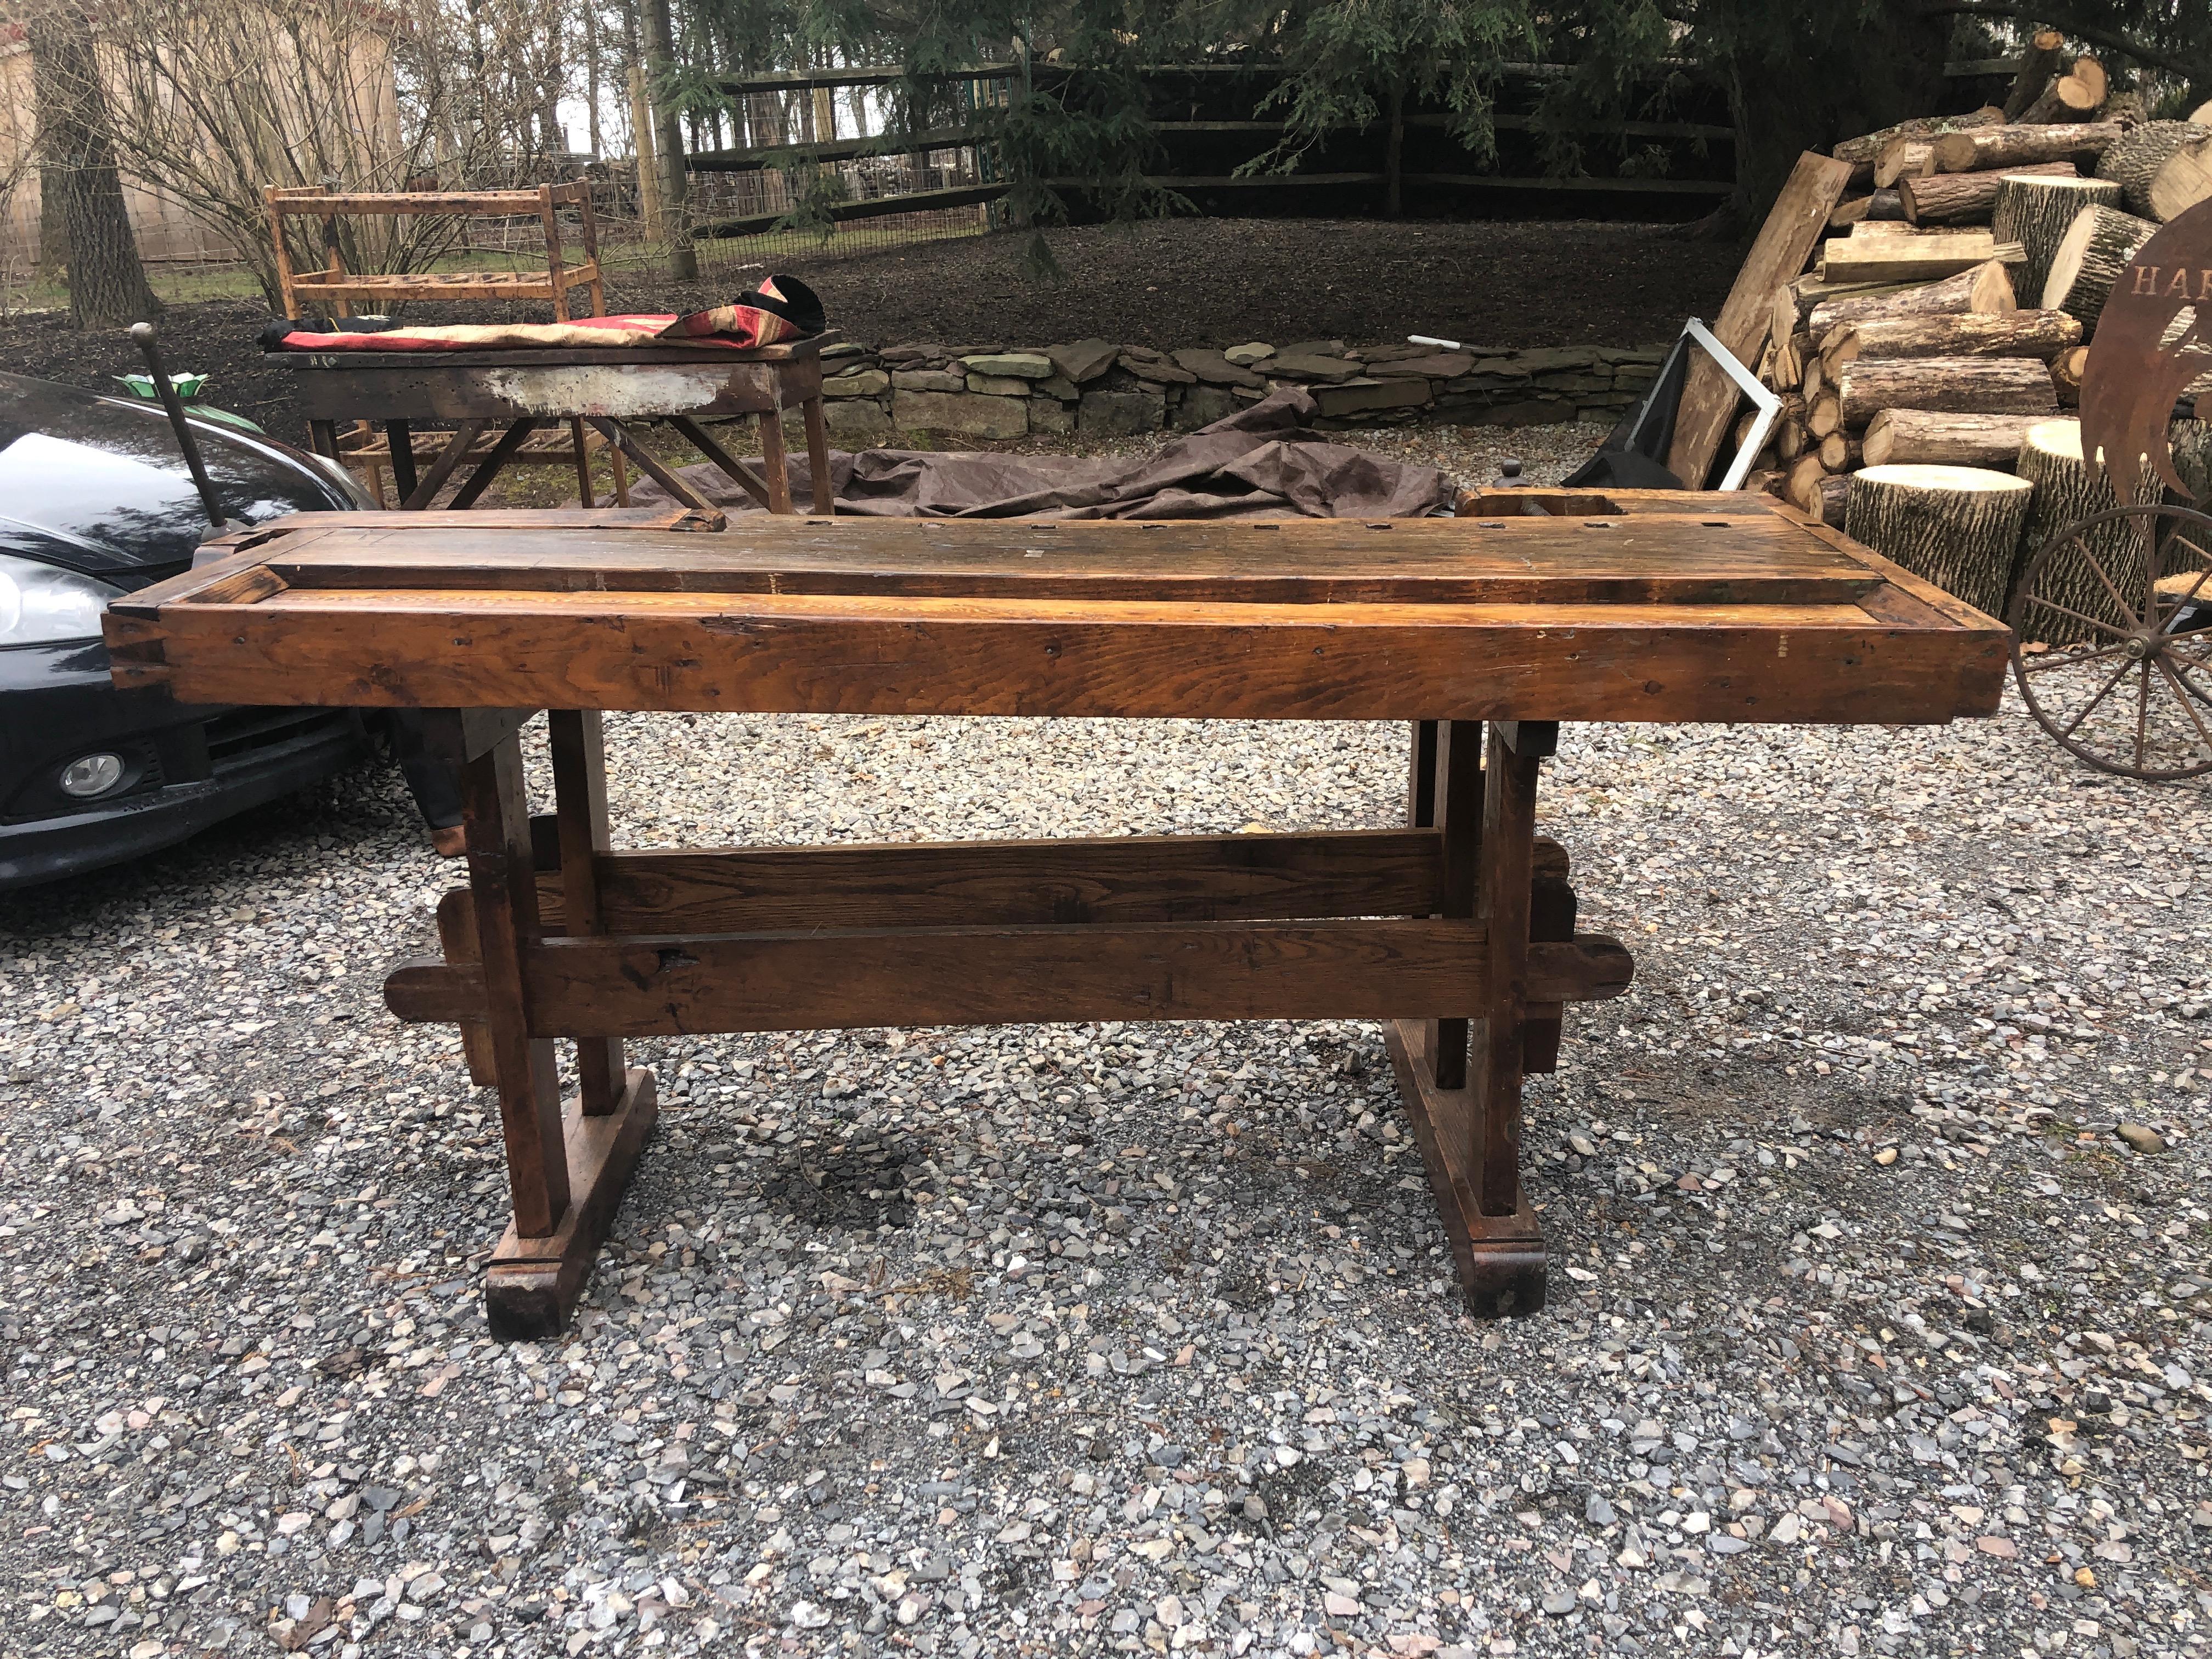 Perfect as a display piece or handsome console or bar, this is a one of a kind very large masculine oak work bench from Vermont having original vices in working condition. Beautiful construction with dovetailing and each piece of wood hand selected